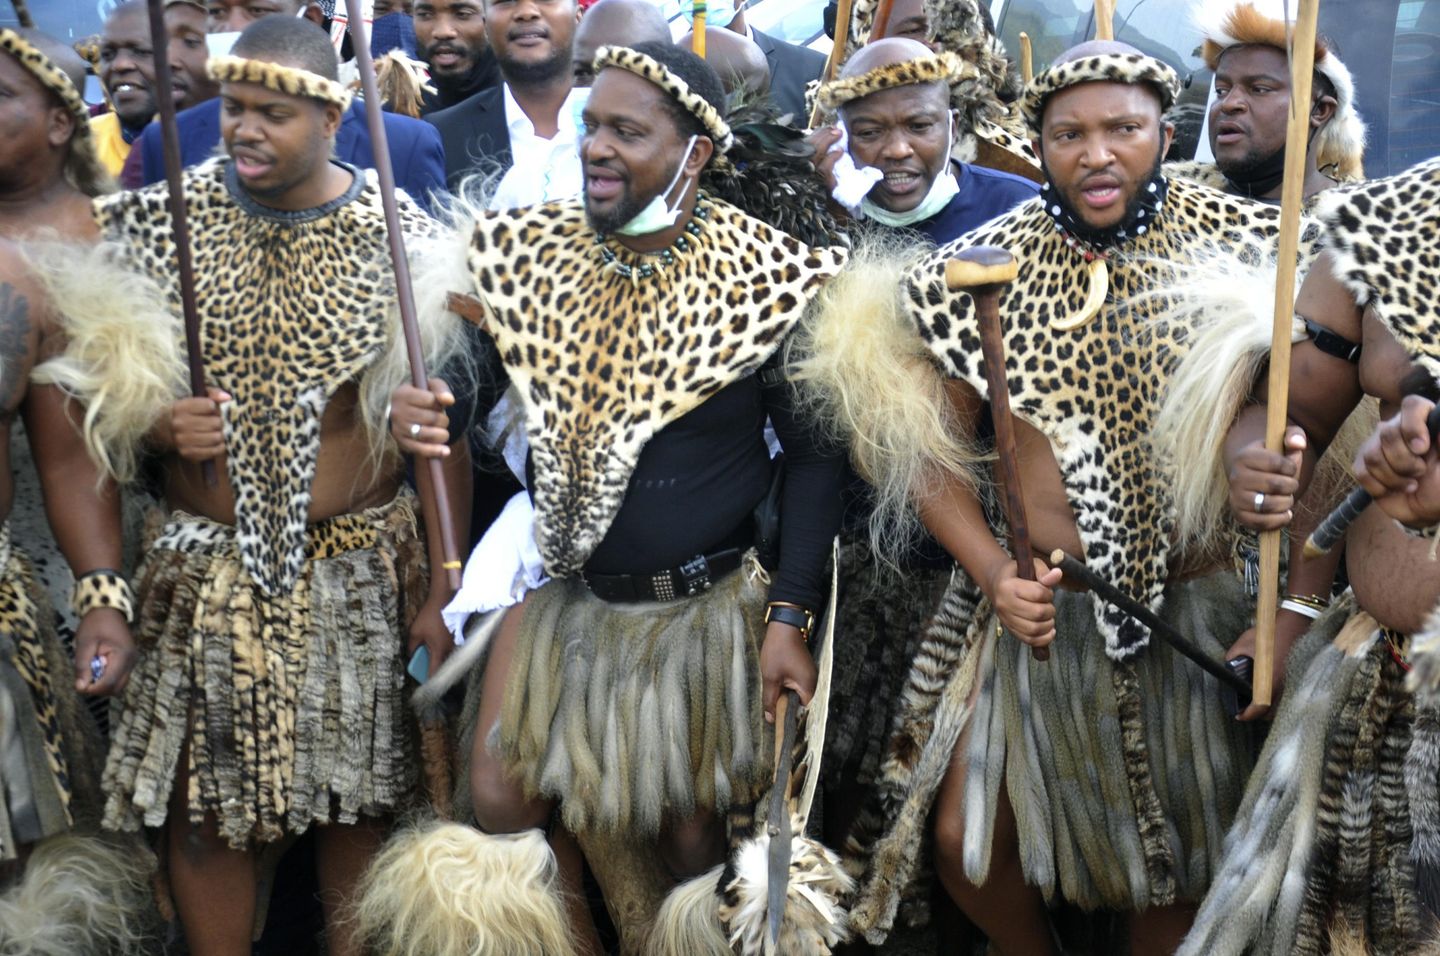 South Africa's royal scandal: New Zulu king's claim disputed thumbnail